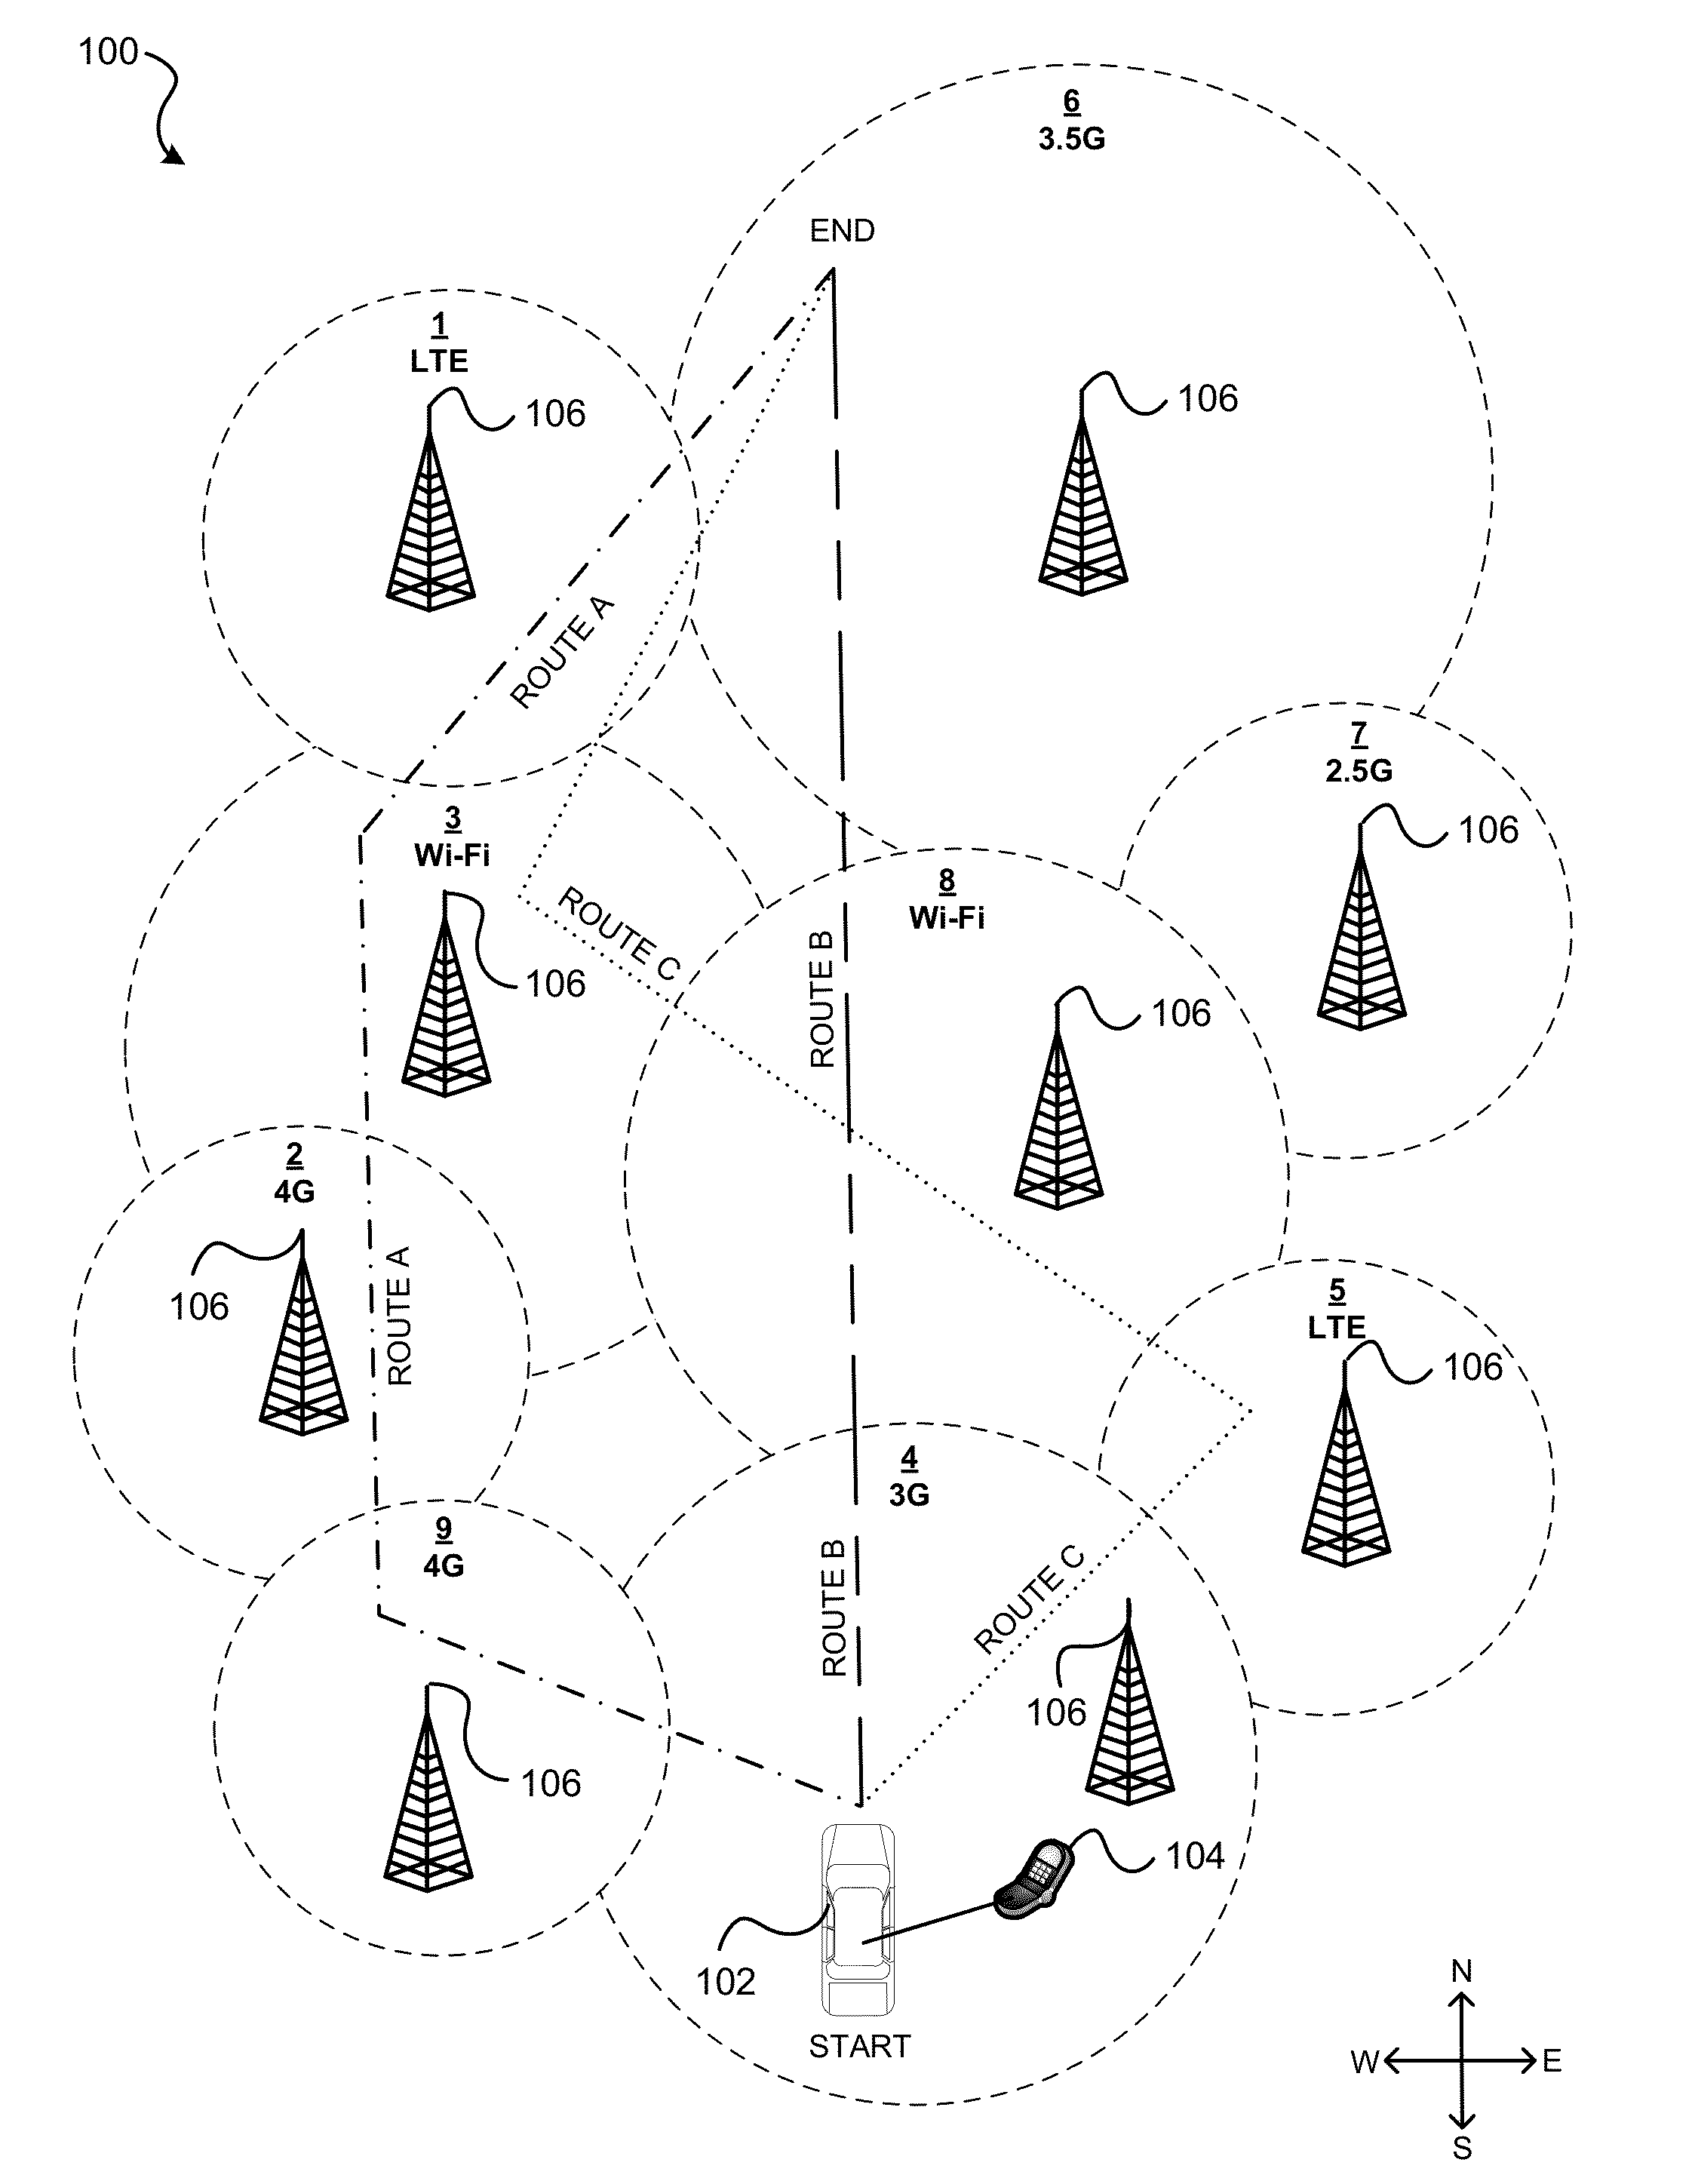 Methods for providing a navigation route based on network availability and device attributes